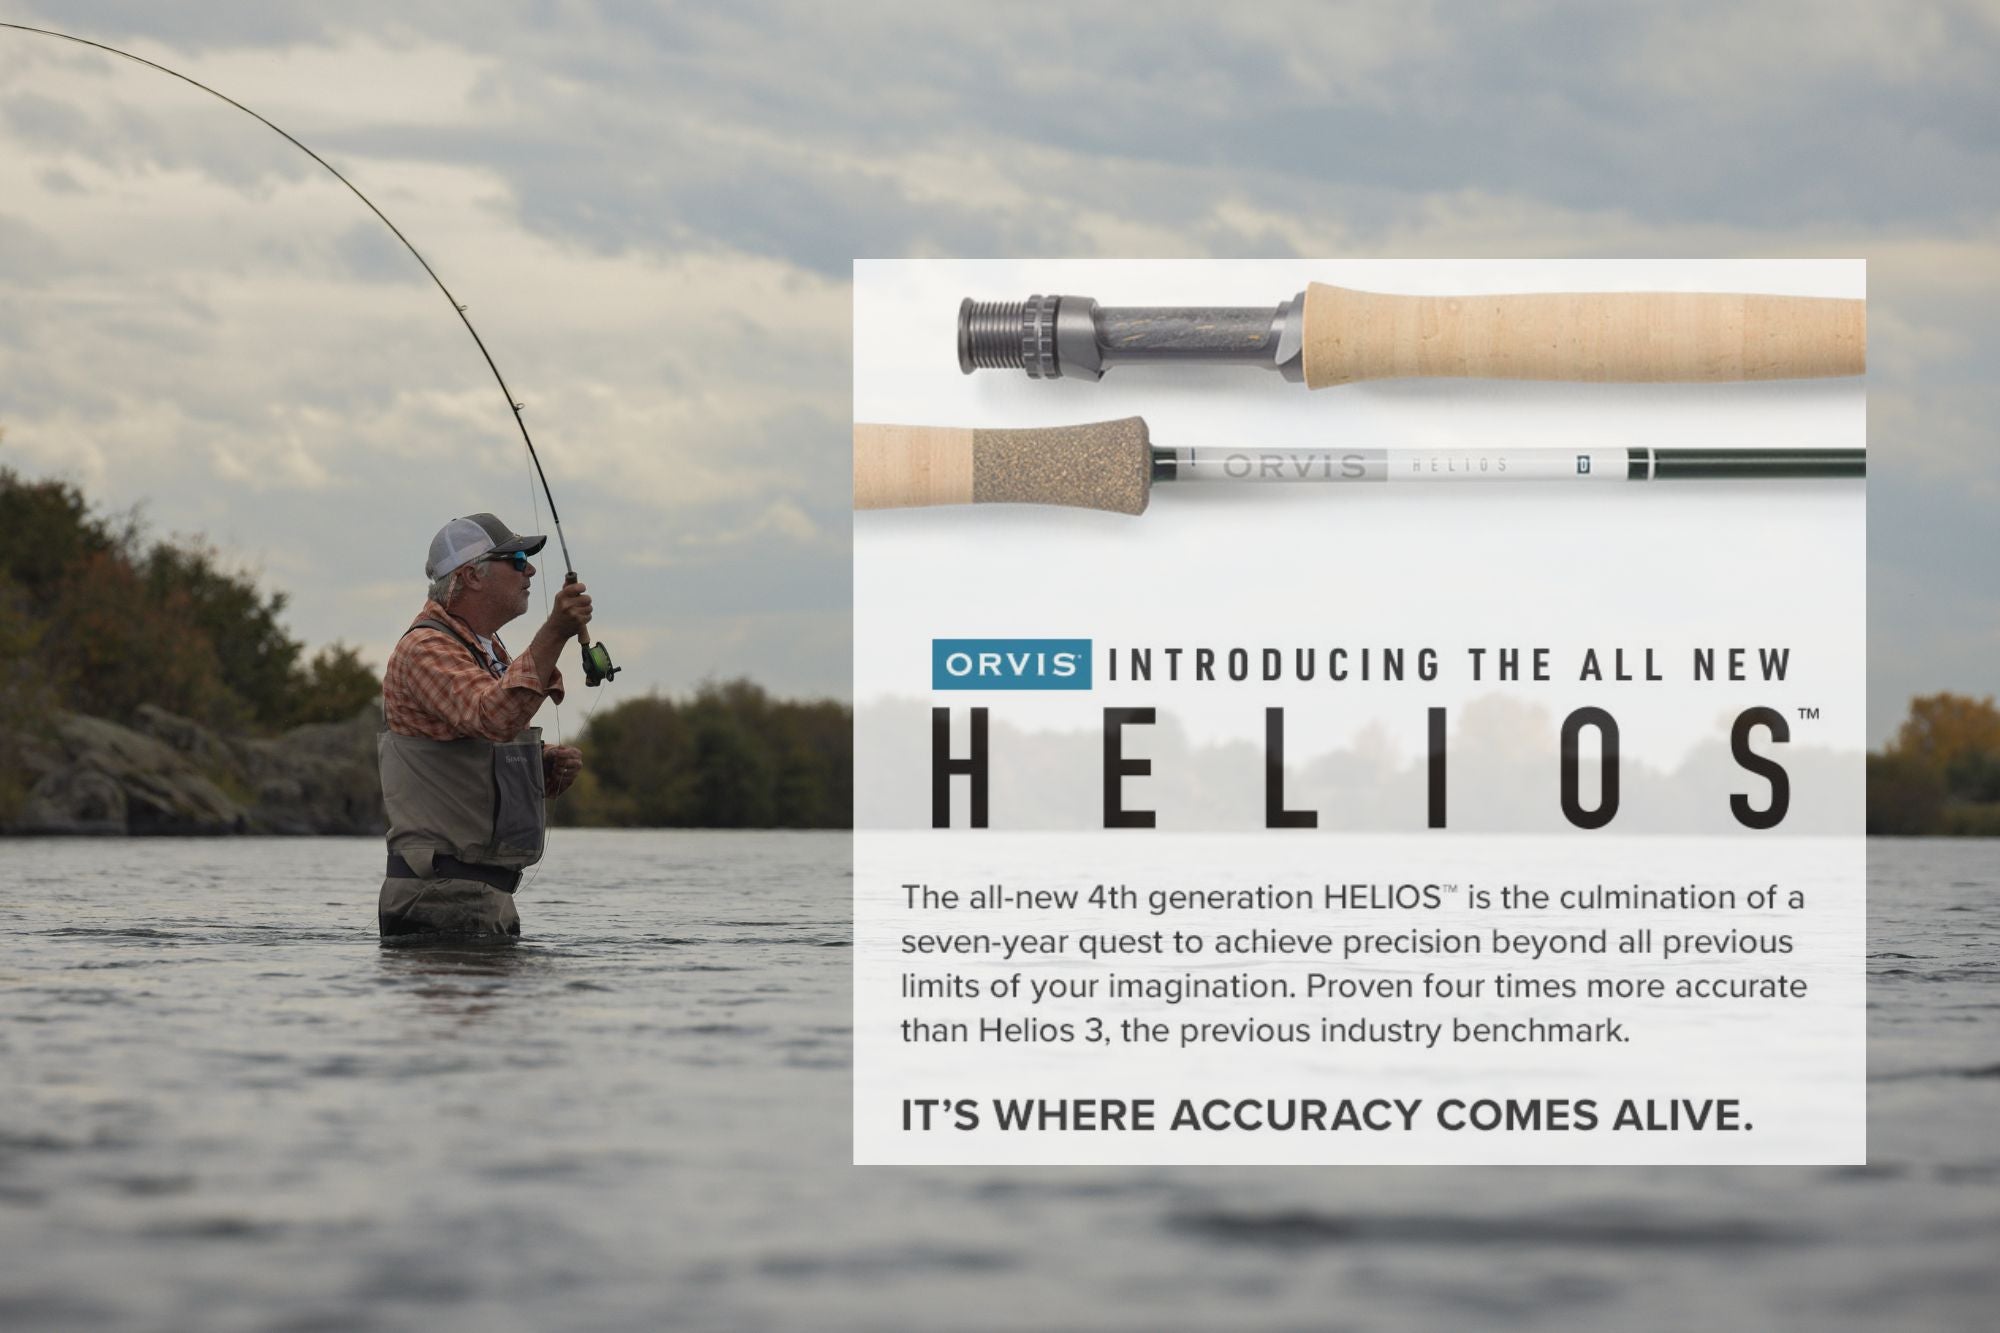 Introducing the Next Generation of Helios from Orvis